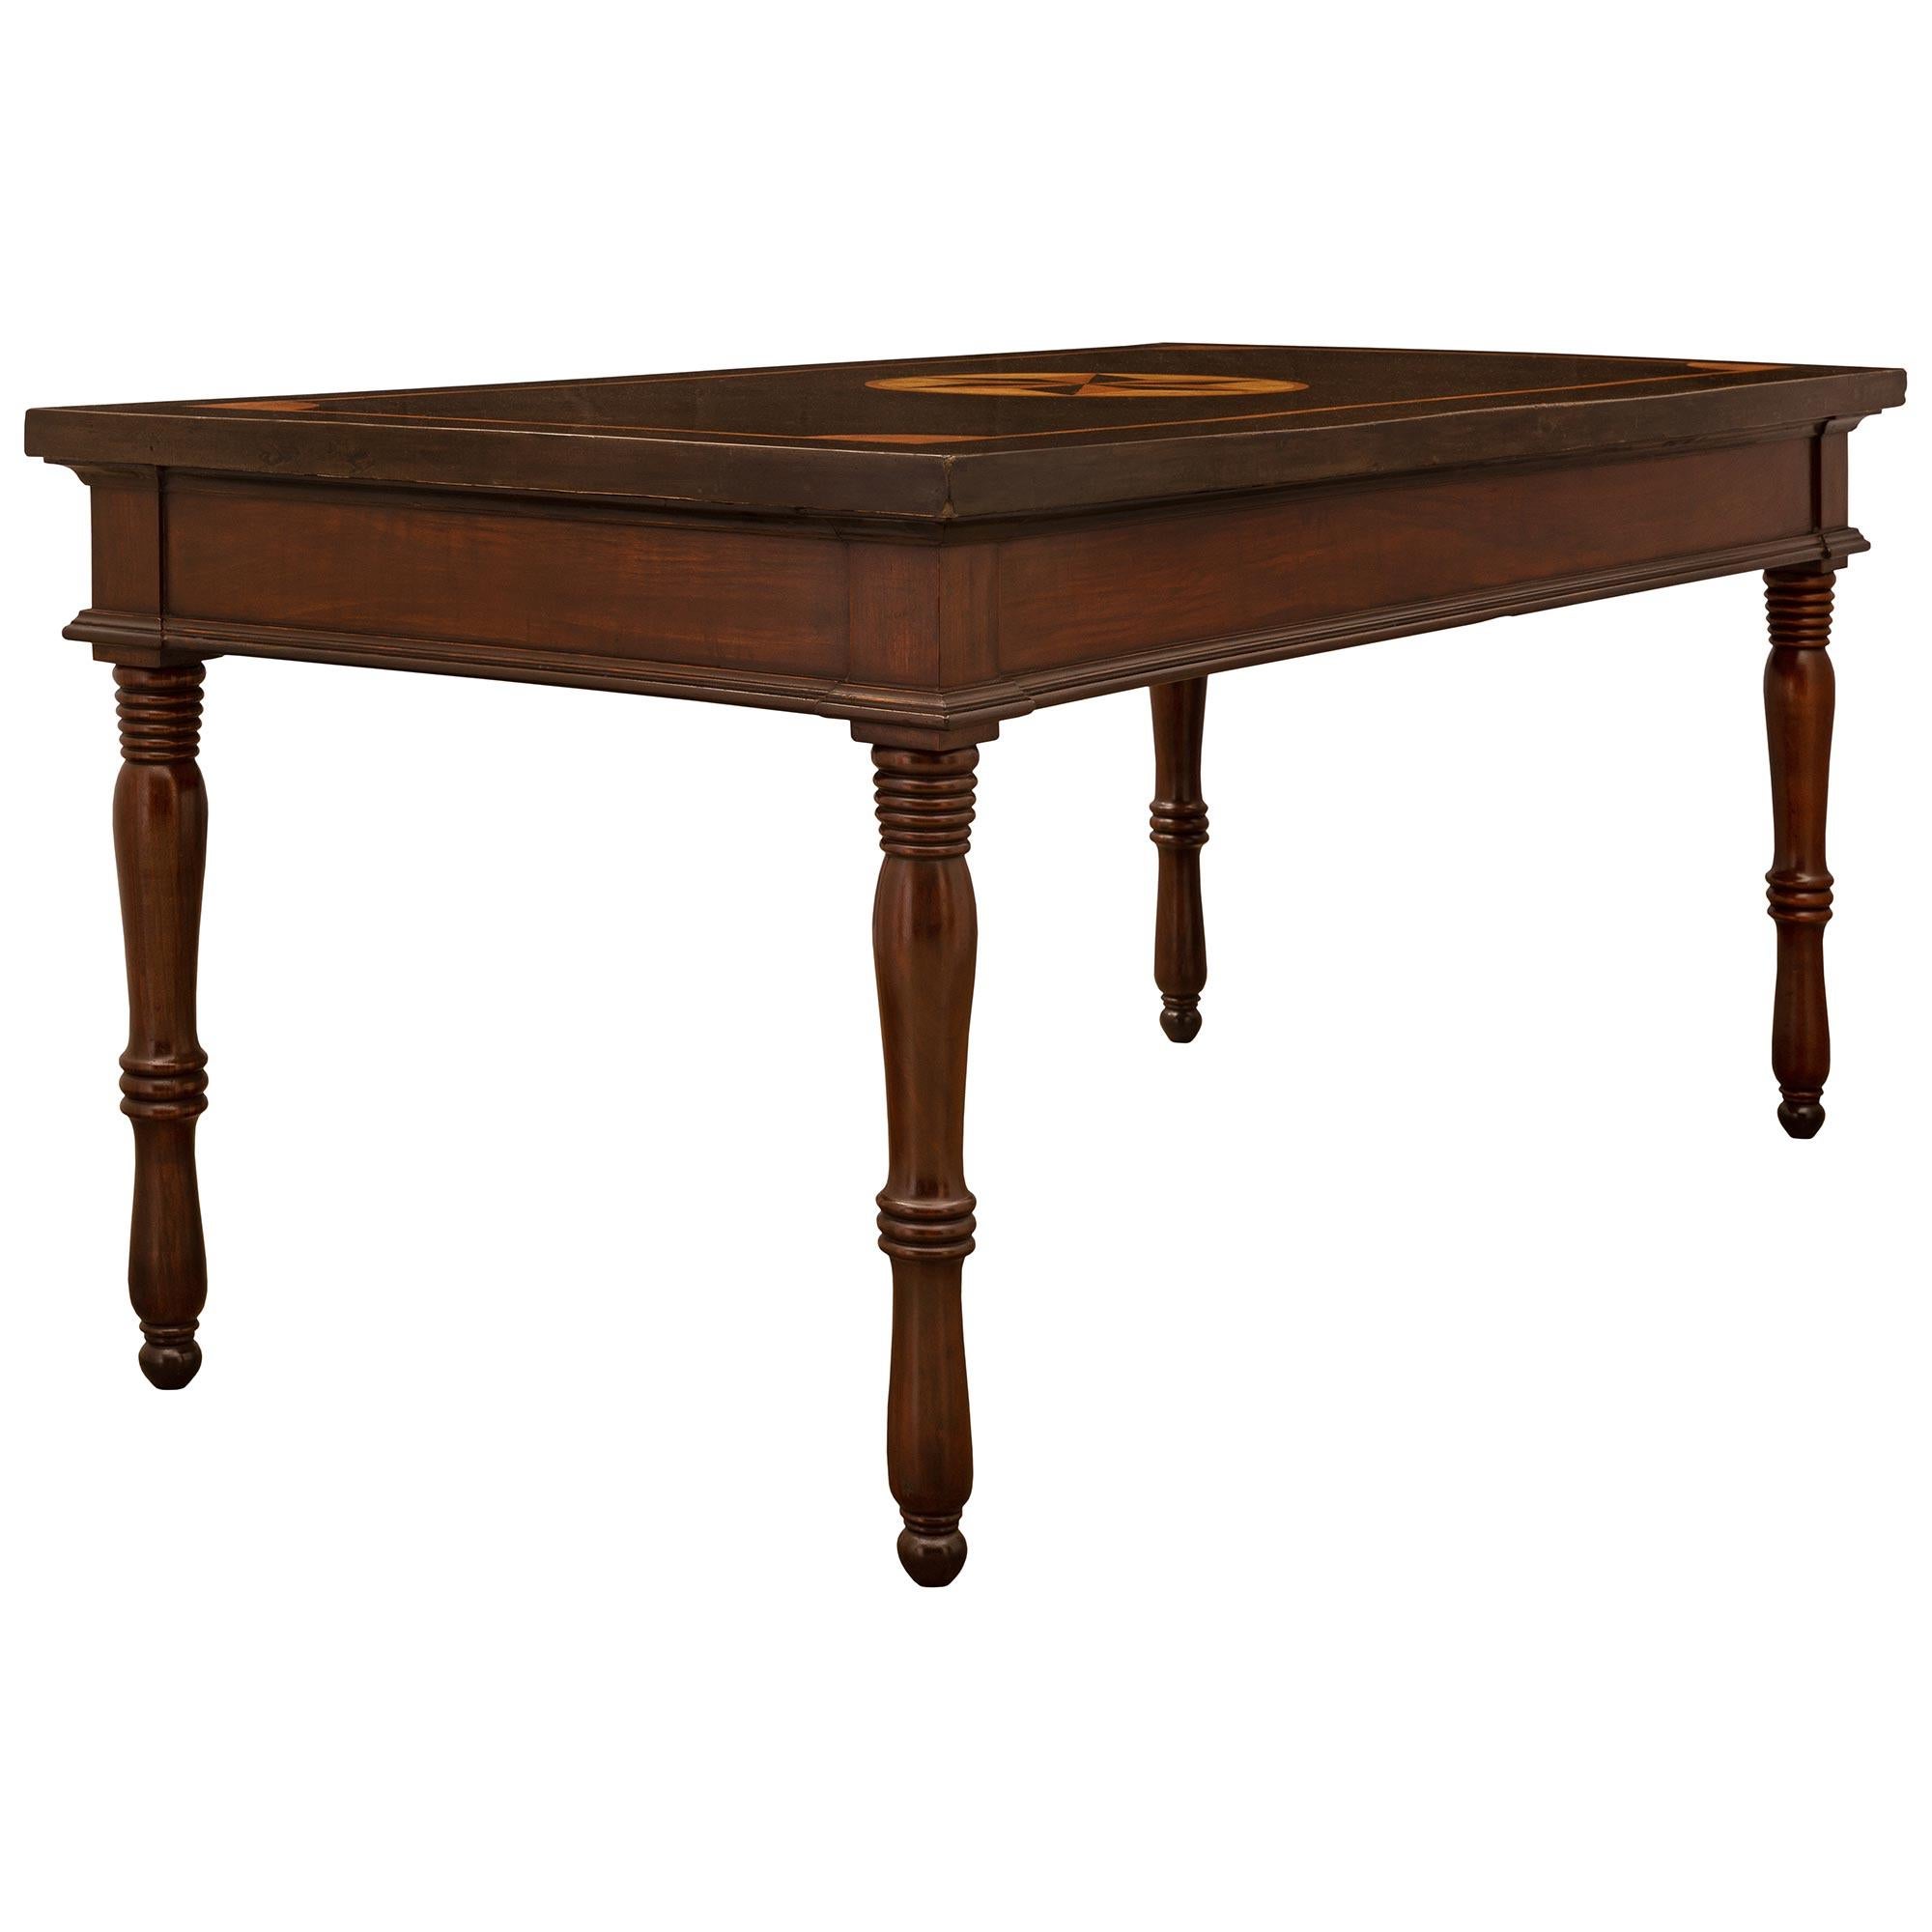 Italian 19th Century Tuscan St. Walnut and Scagliola Center Table In Good Condition For Sale In West Palm Beach, FL